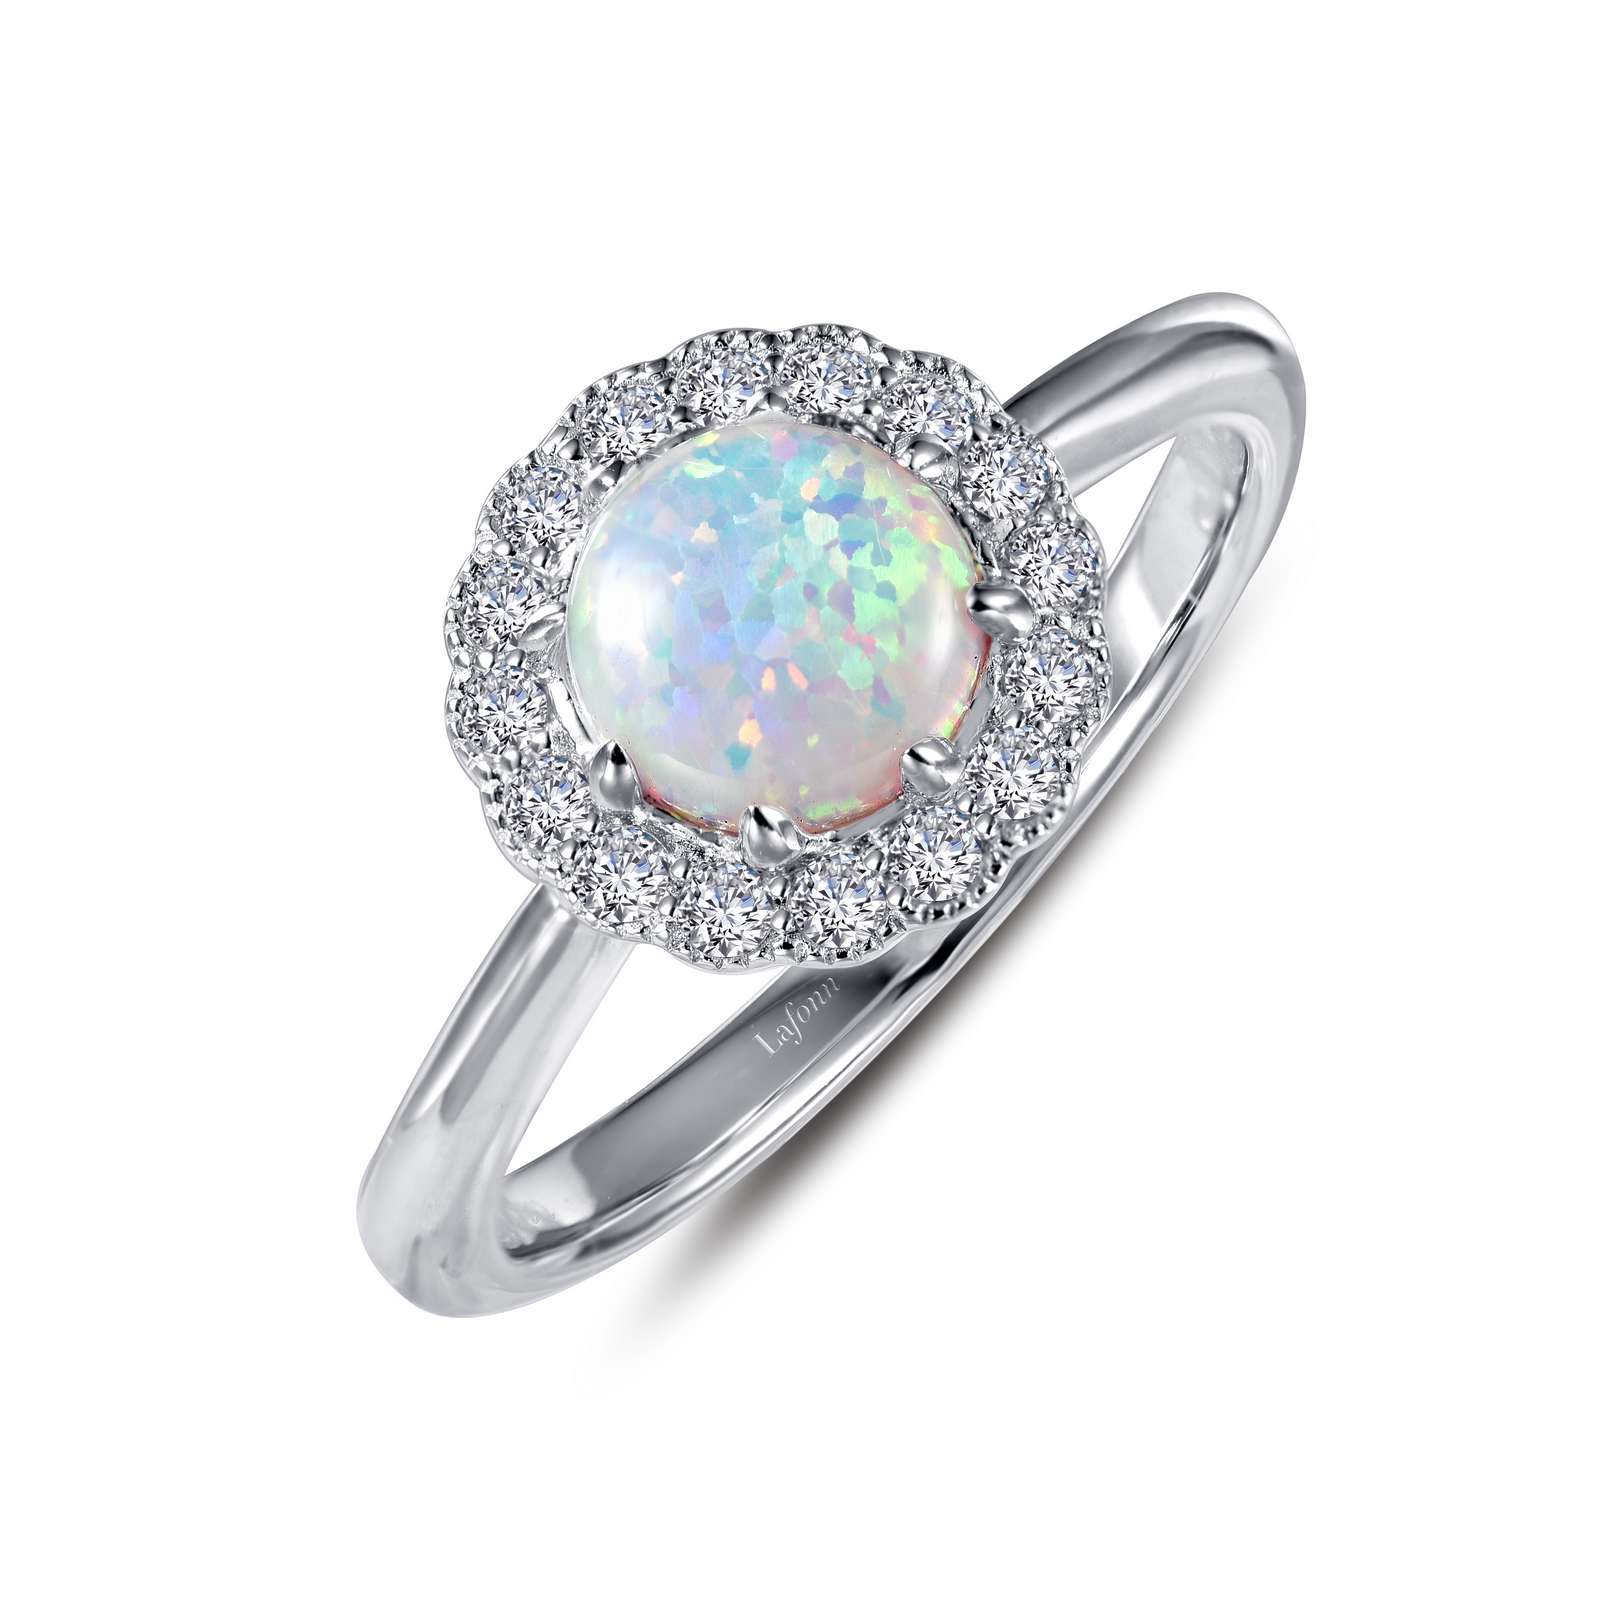 Heritage Opal Platinum Bonded Ring Griner Jewelry Co. Moultrie, GA